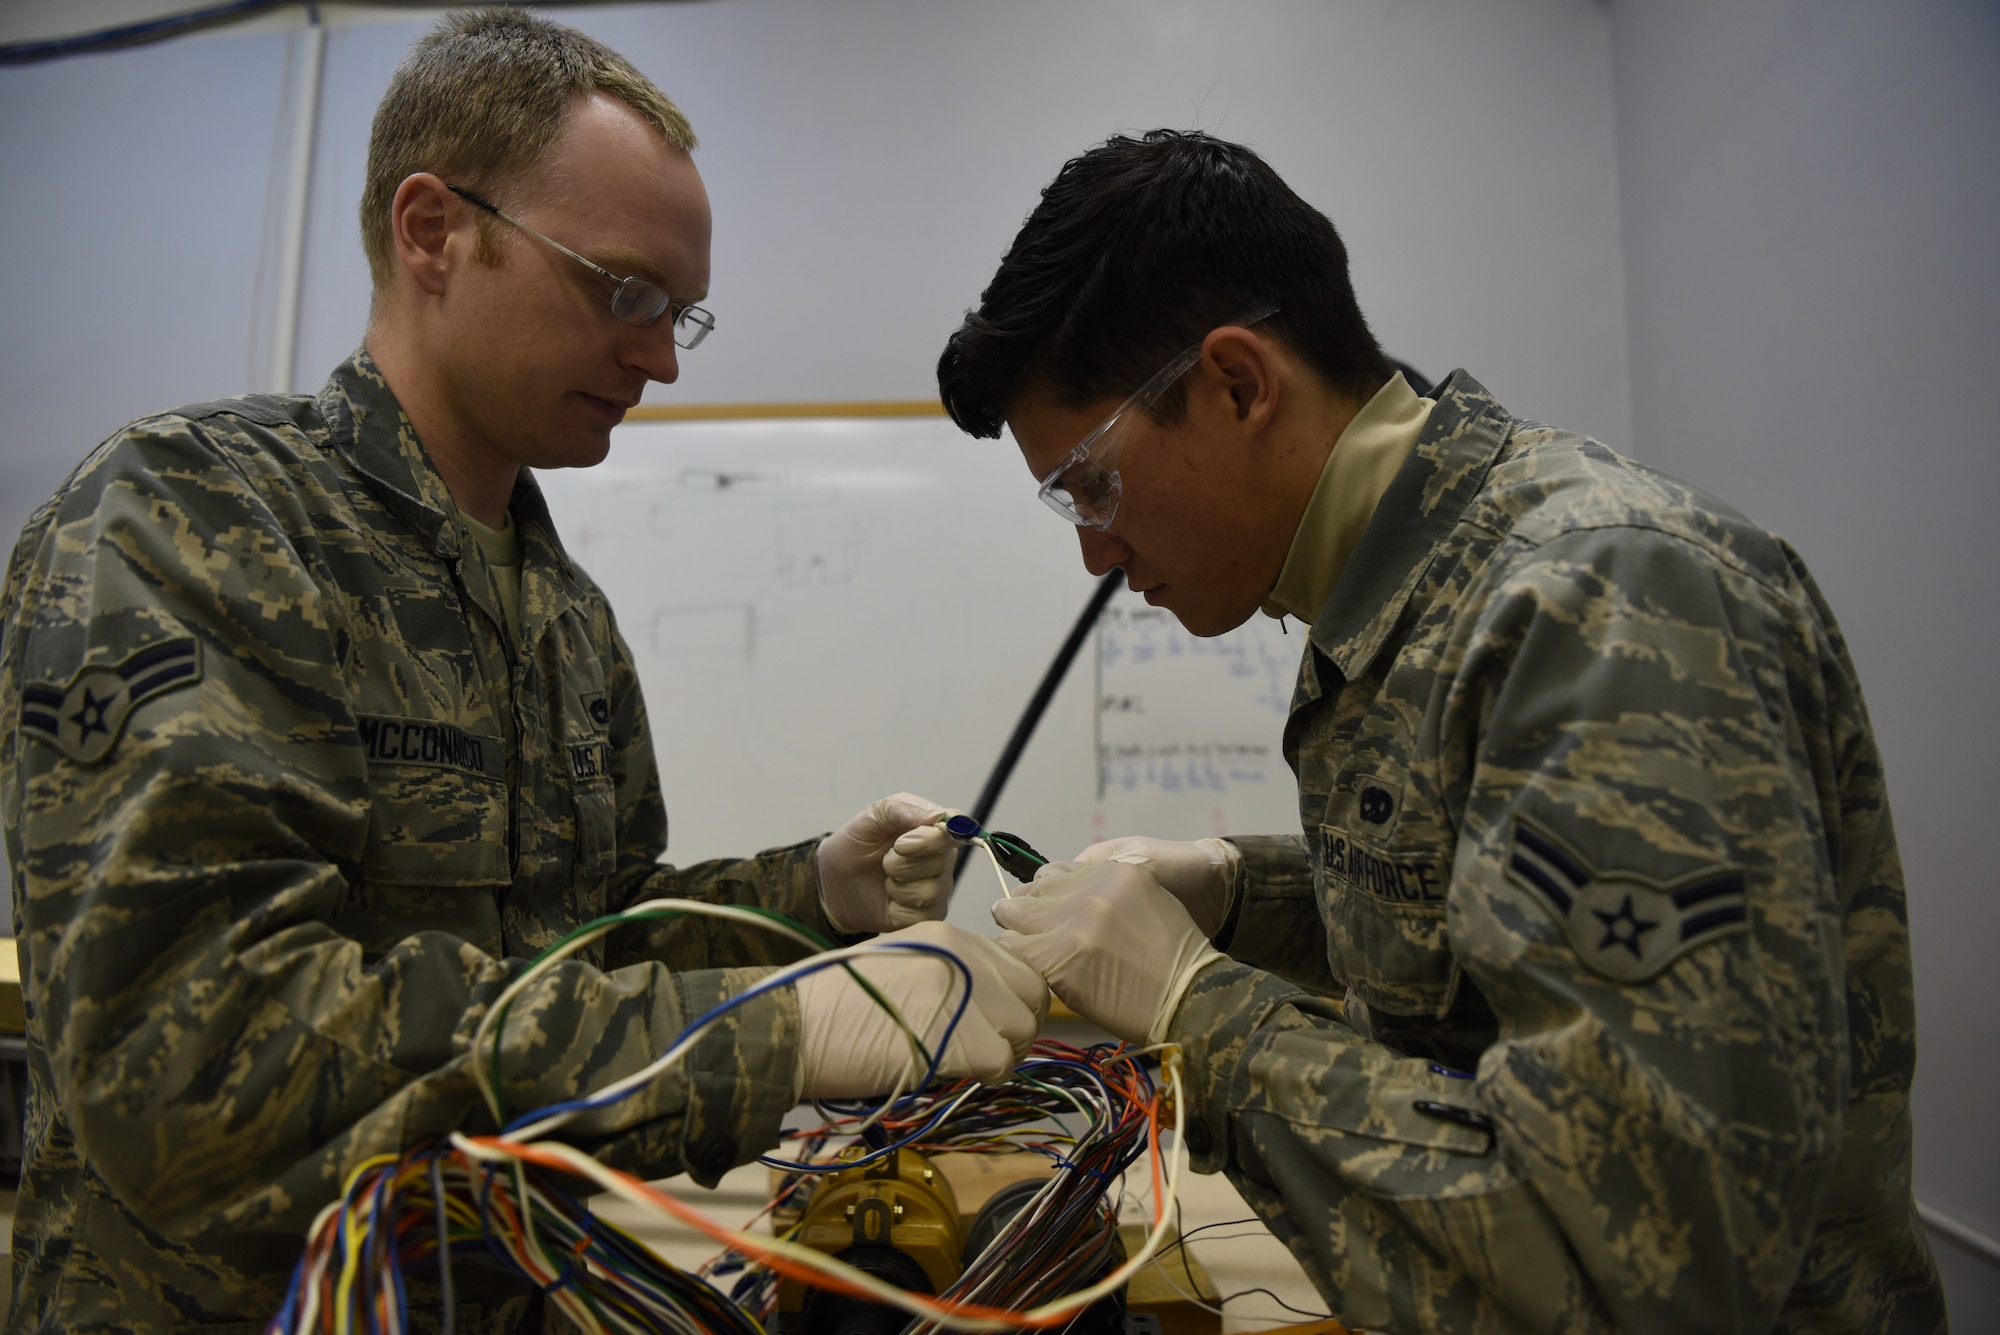 Airman 1st Class John Mcconnico and Airman 1st Class Wilfredo Hernandez Mendez, 90th Missile Maintenance Squadron Hardened Intersite Cable System technicians, train to splice together a wire within a larger cable Jan. 31, 2019, at F.E. Warren Air Force Base, Wyo. The 90th MMXS HICS team maintains the upkeep and repair of the cables throughout the missile field. The cables run throughout the F.E. Warren Missile Complex and are part of the communication system between launch control centers and an ICBM at a launch facility. (U.S. Air Force photo by Senior Airman Abbigayle Williams)